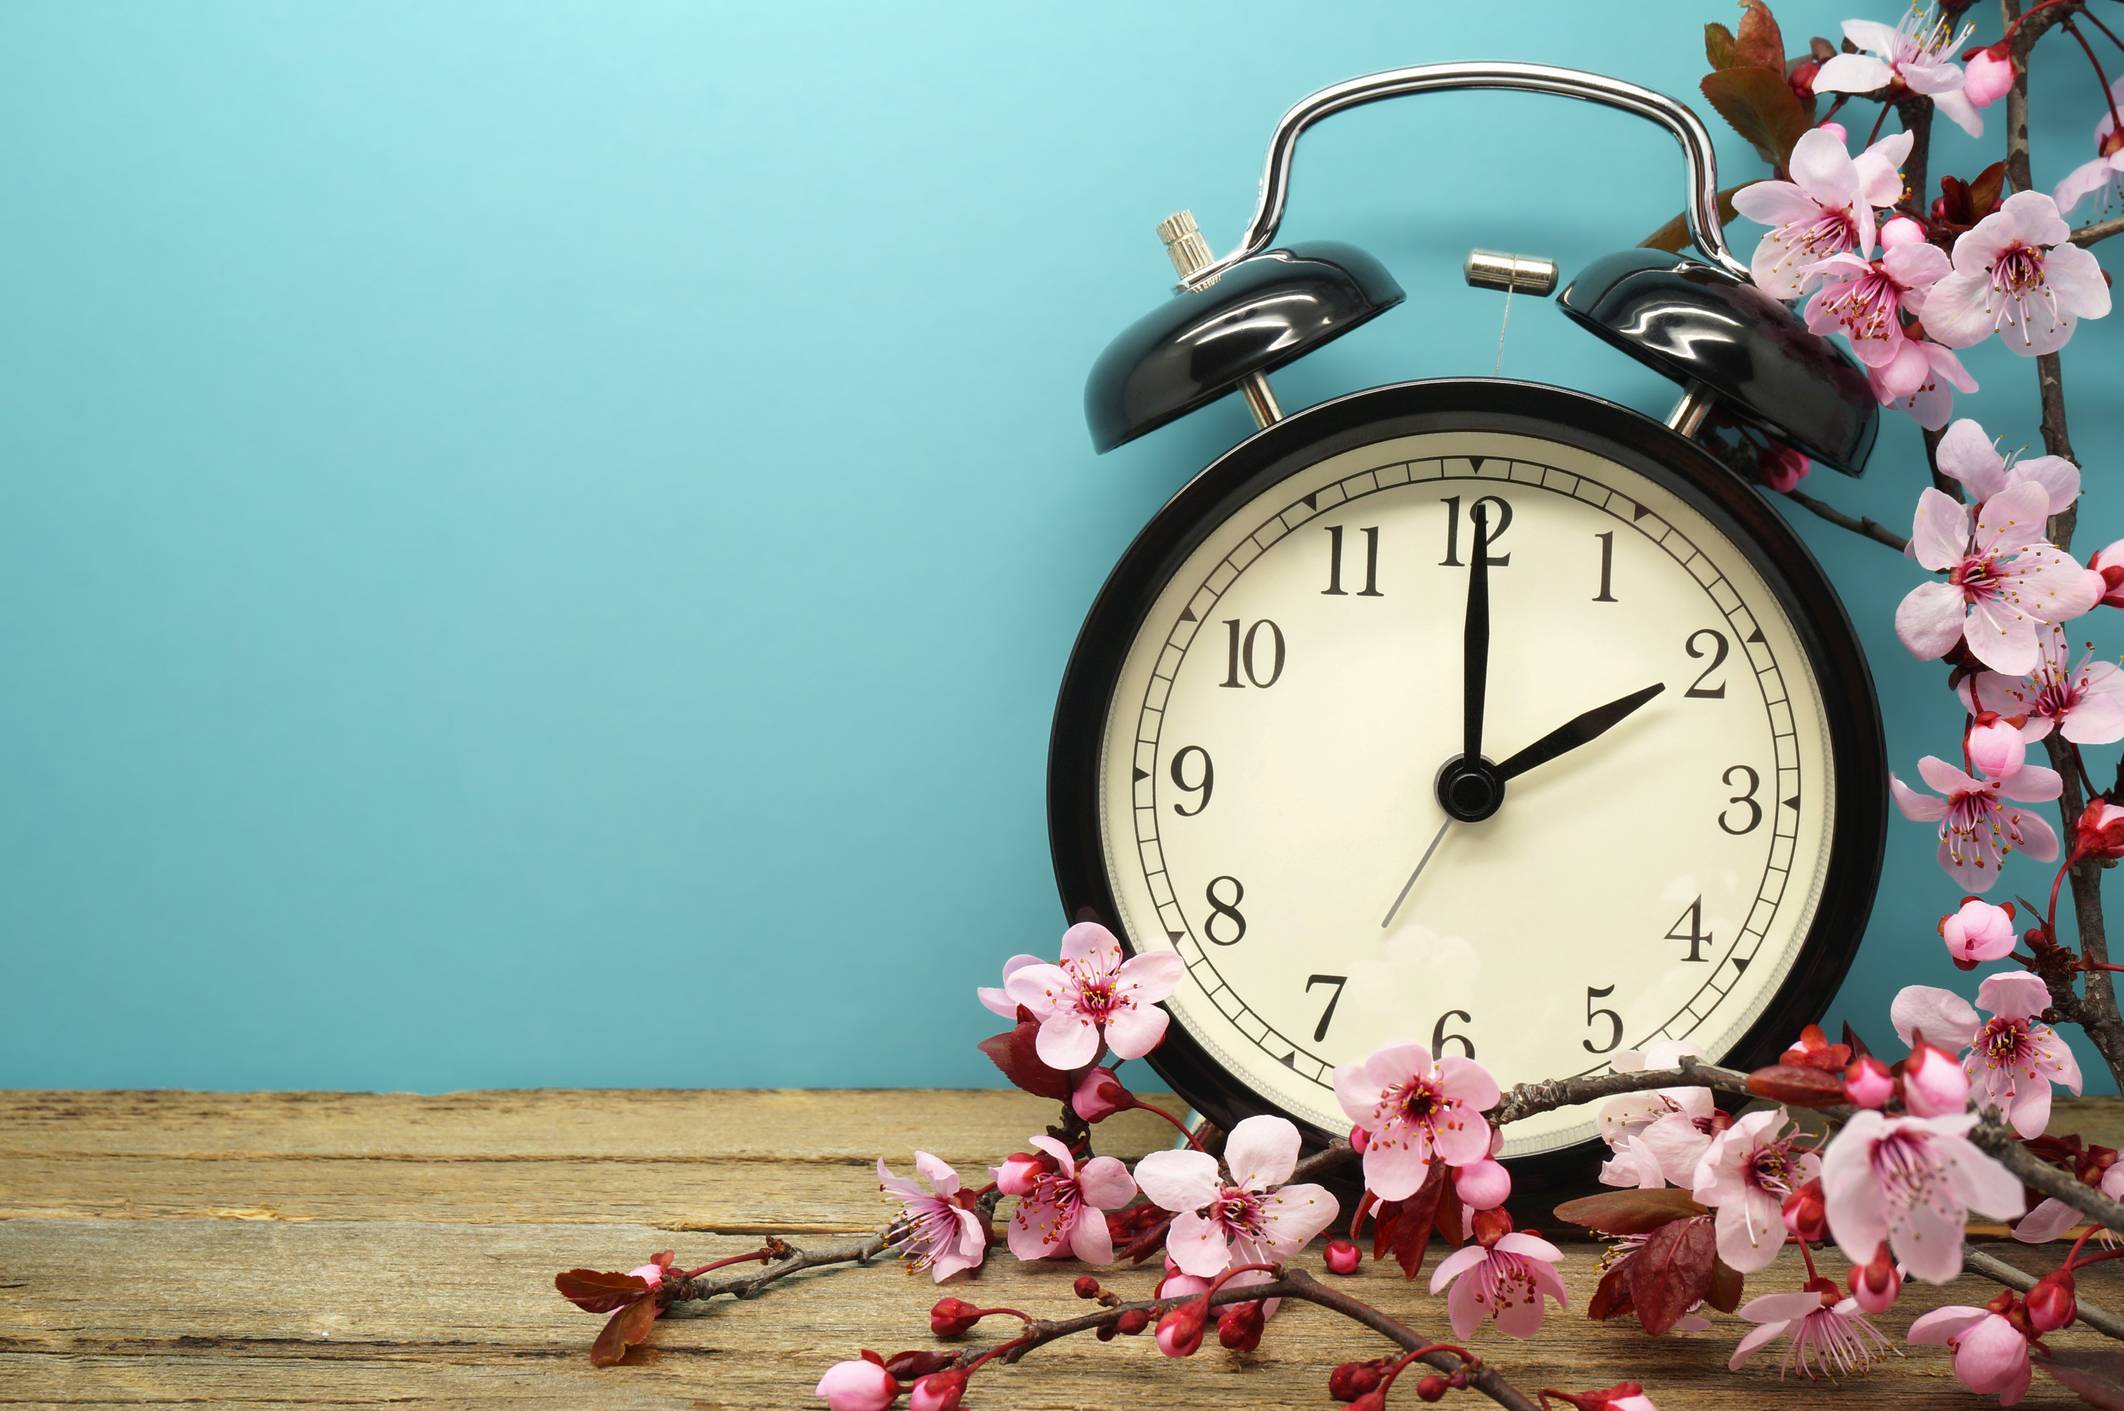 Daylight saving time can affect your health by uofl health